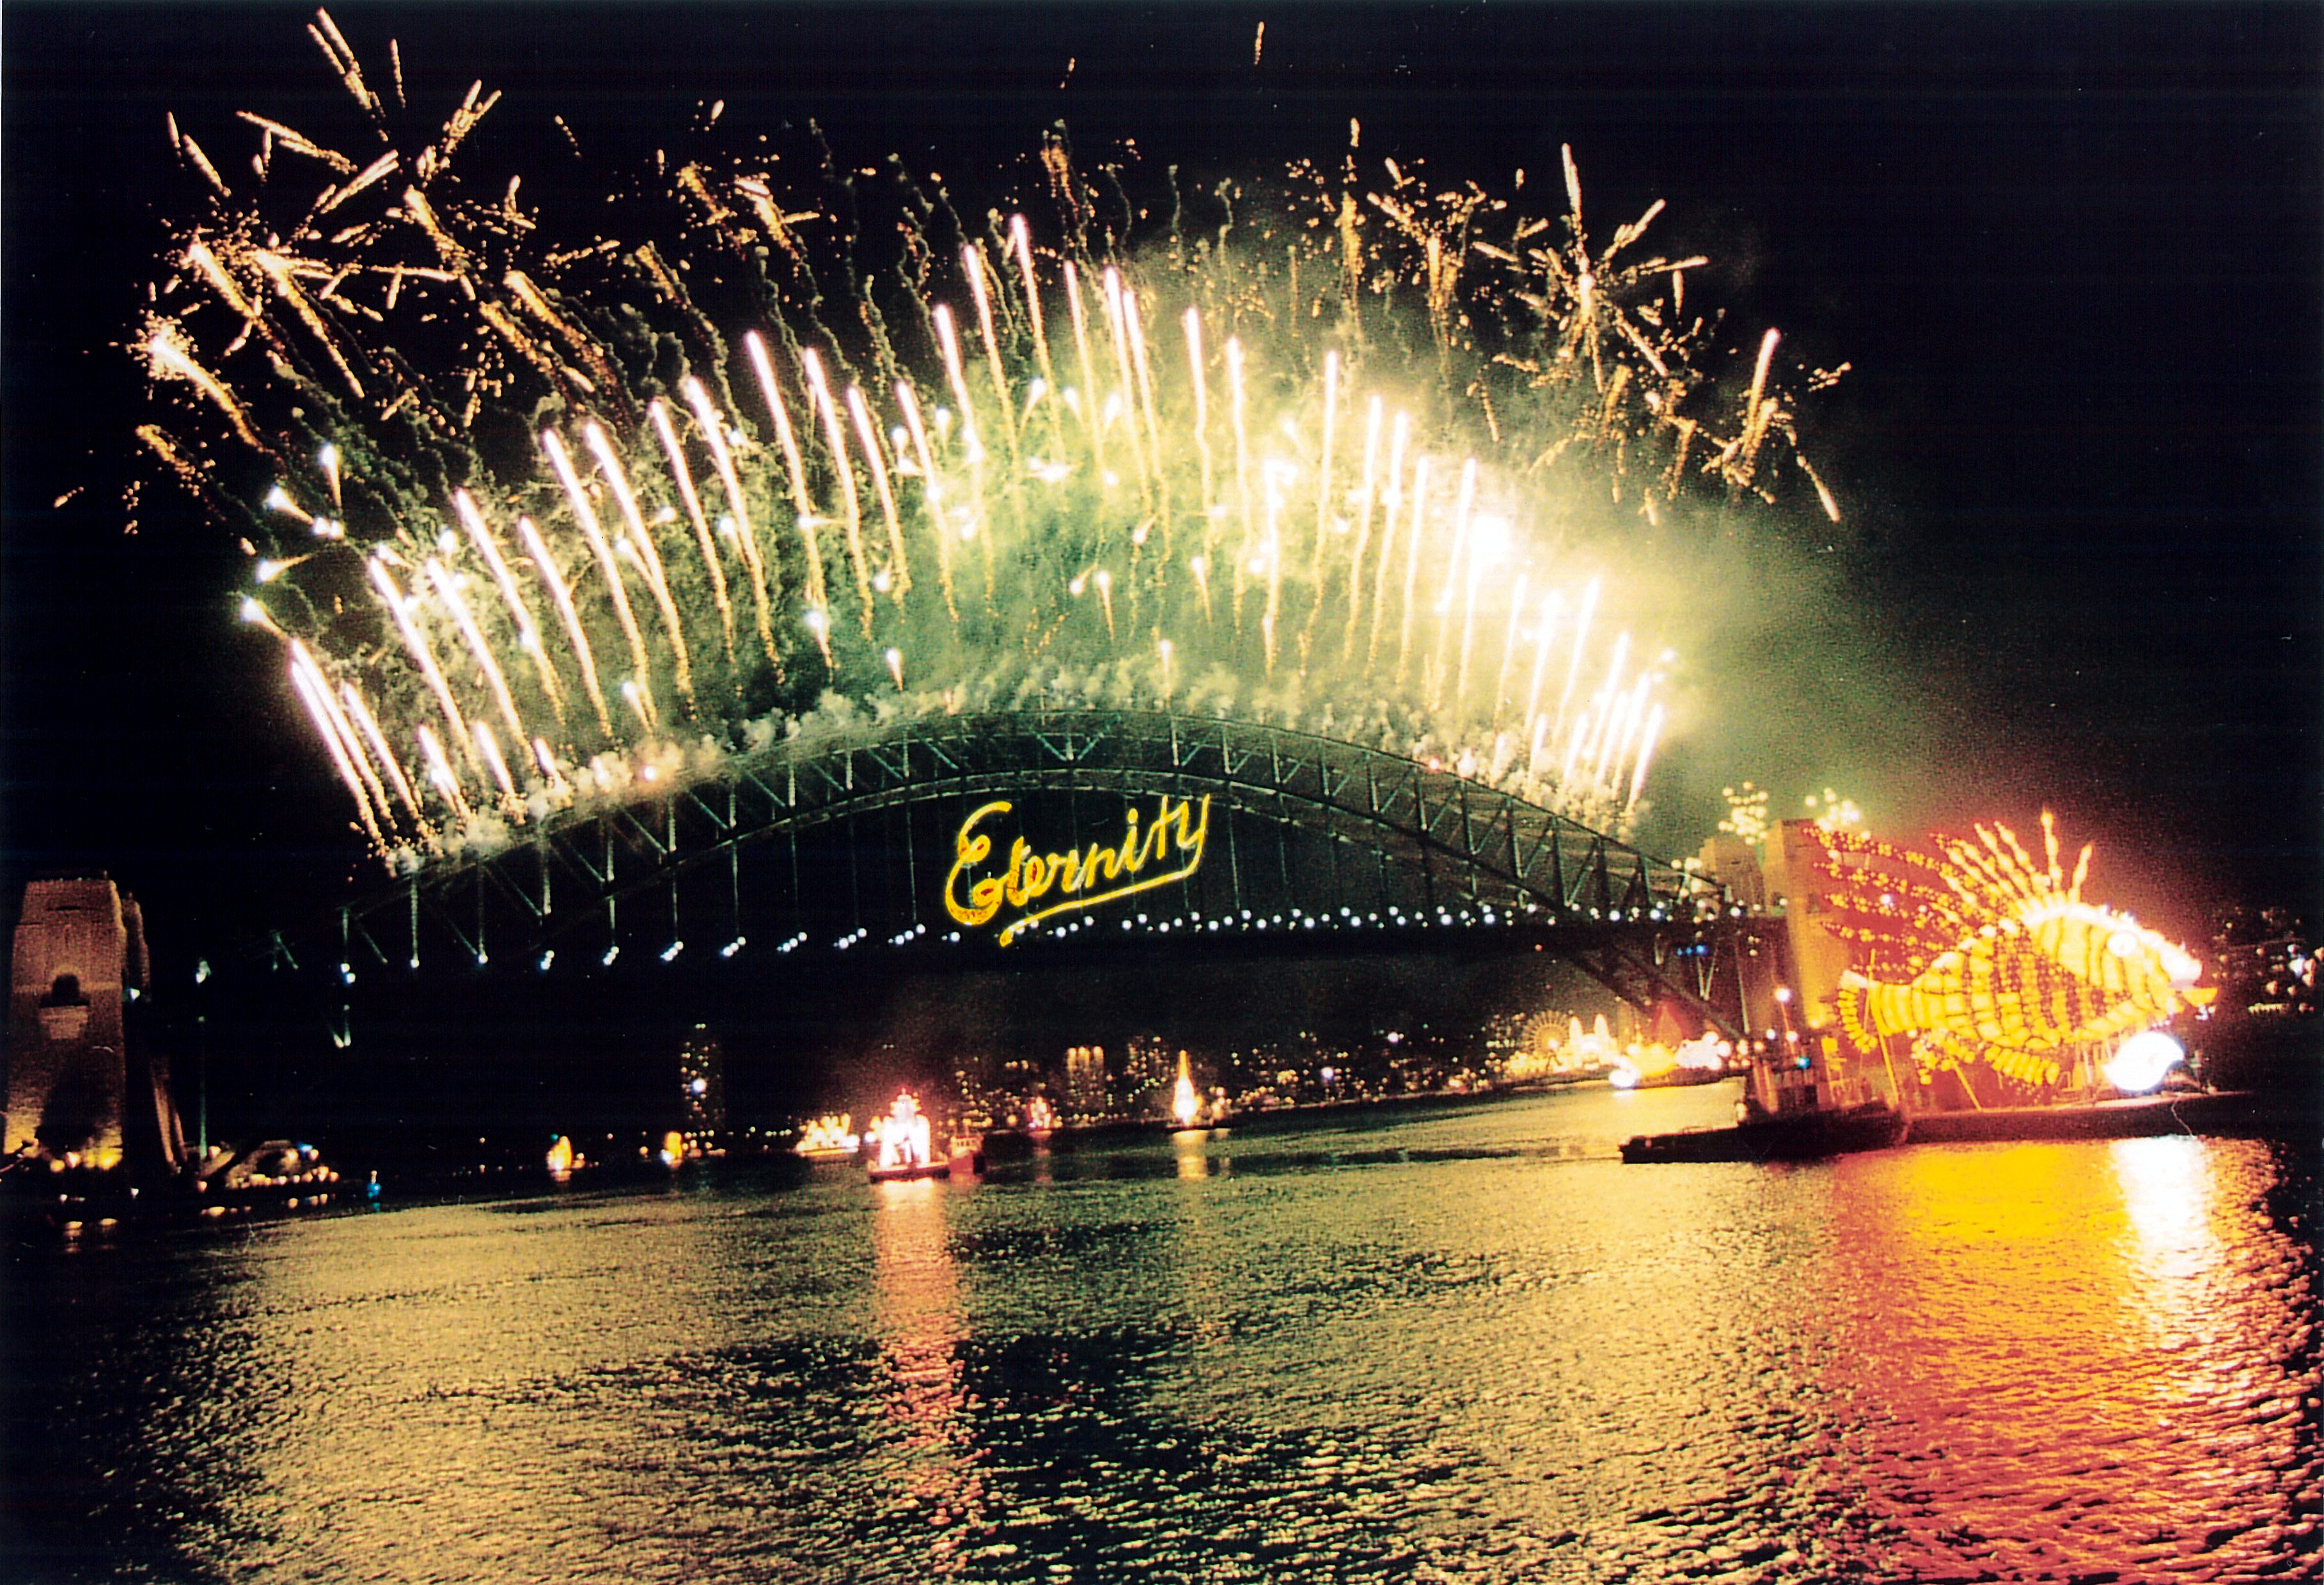 Image 4 of 4 - Fireworks on the Sydney Harbour Bridge with the word ‘Eternity’ on the face of the bridge.